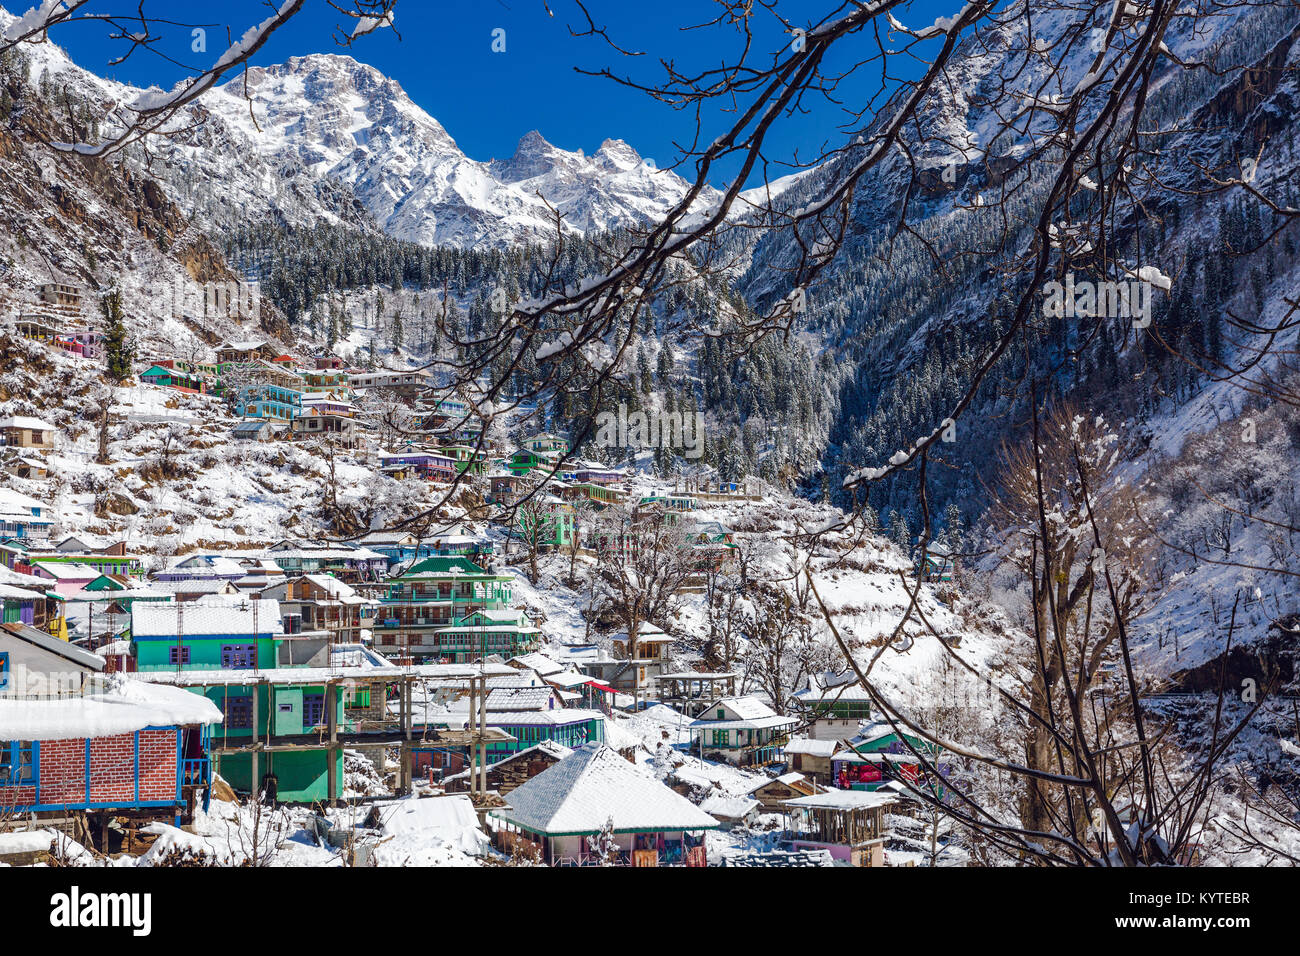 Tosh village in Himachal pradesh, India entirely covered in snow after a massive snow fall in February cold winter. Serene village life in tranquility Stock Photo